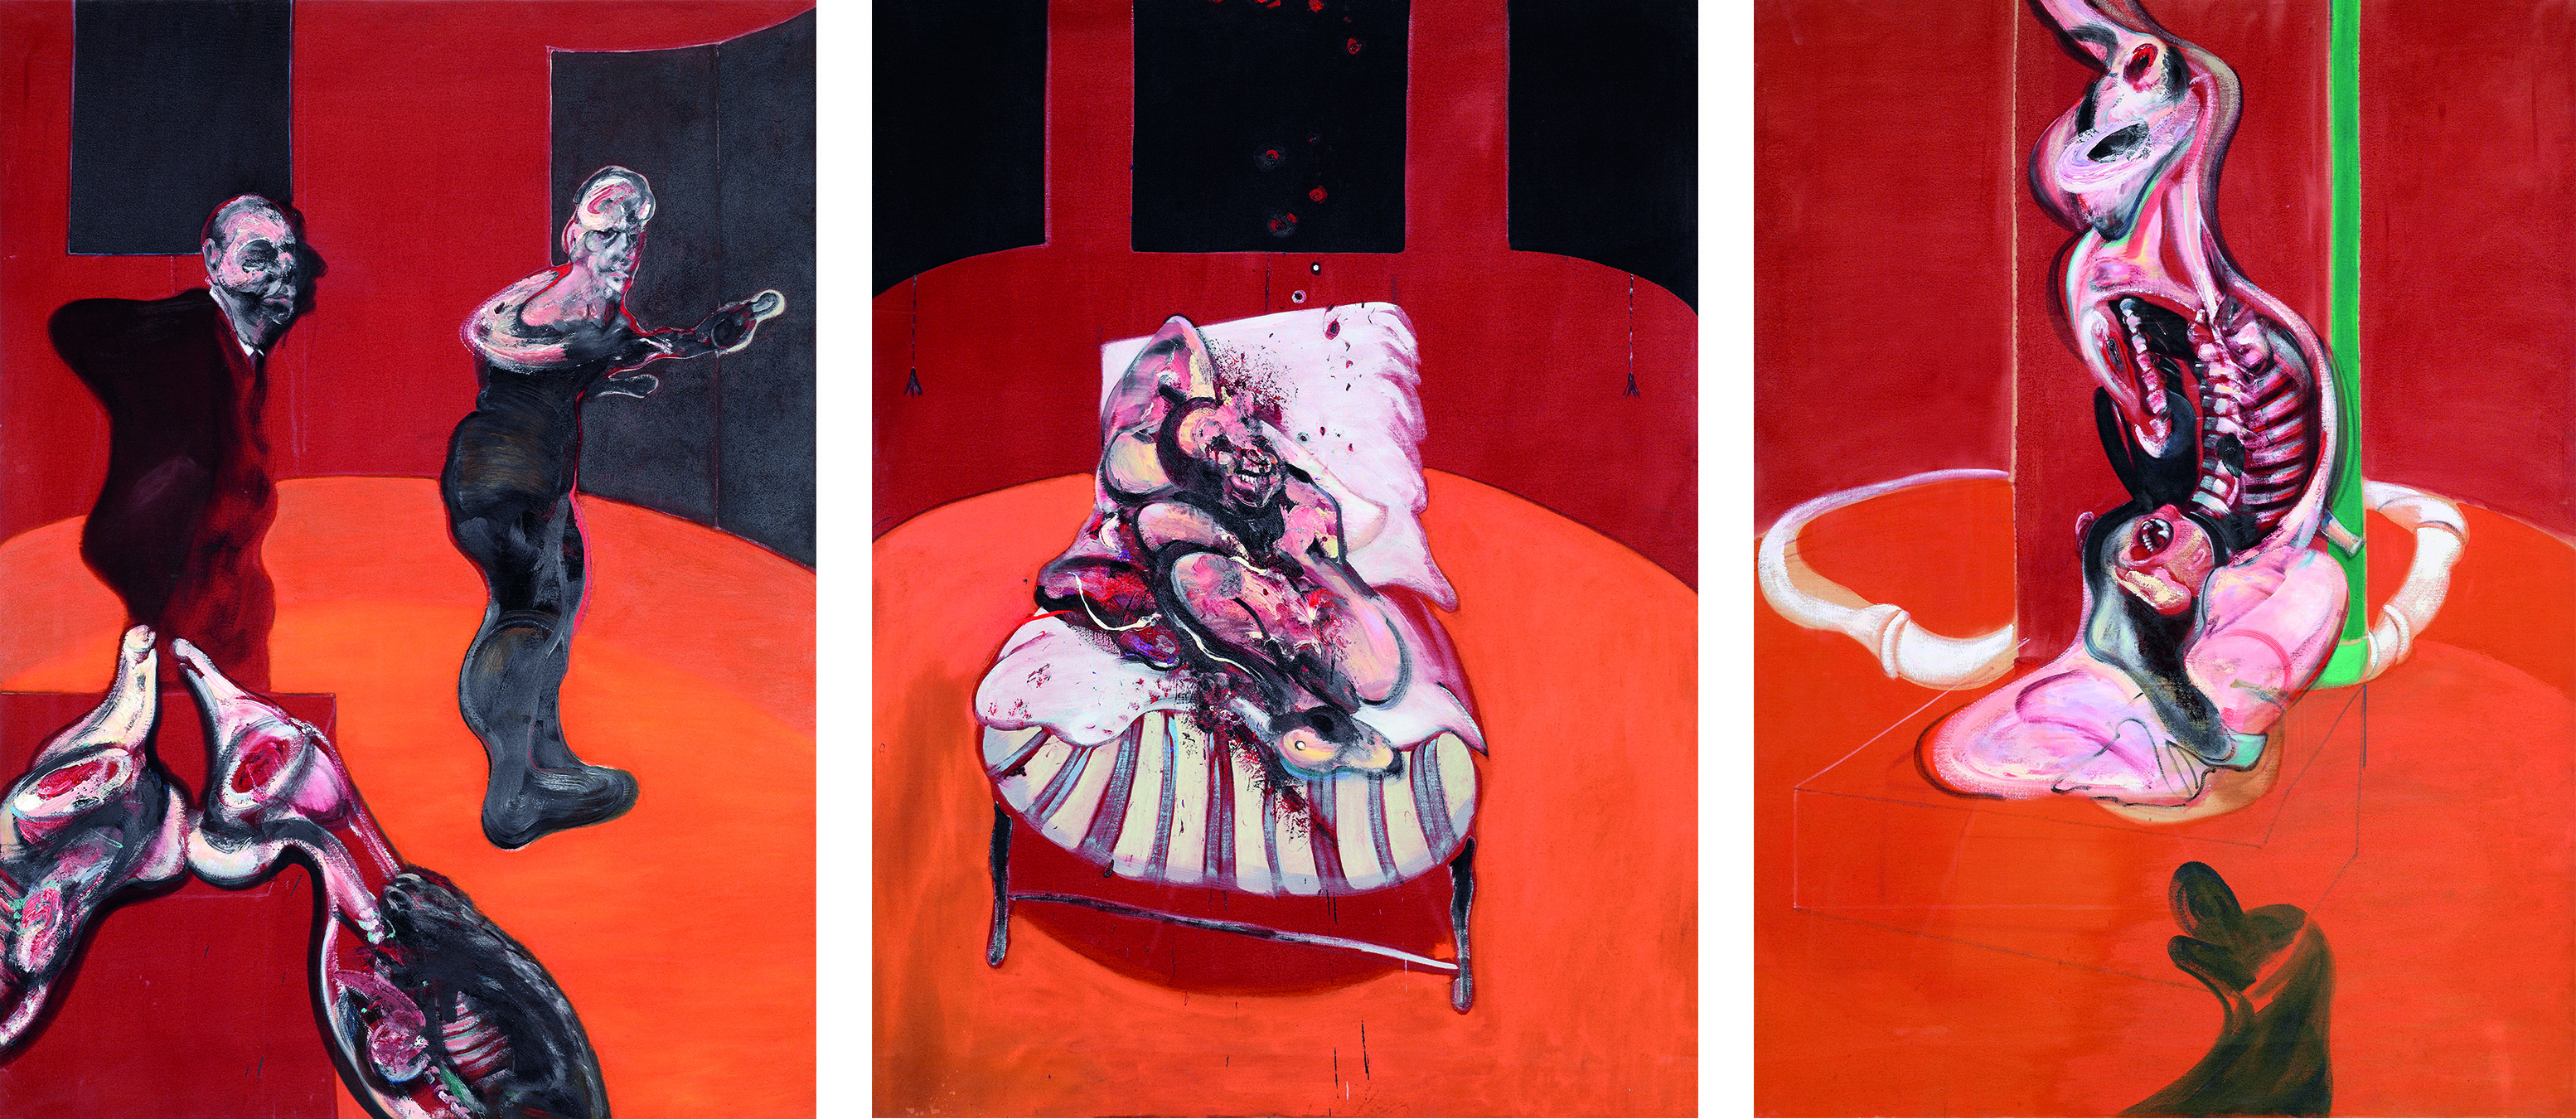 Francis Bacon, Three Studies for a Crucifixion, 1962. Oil on canvas. CR number 62-04. © The Estate of Francis Bacon / DACS London 2019. All rights reserved.